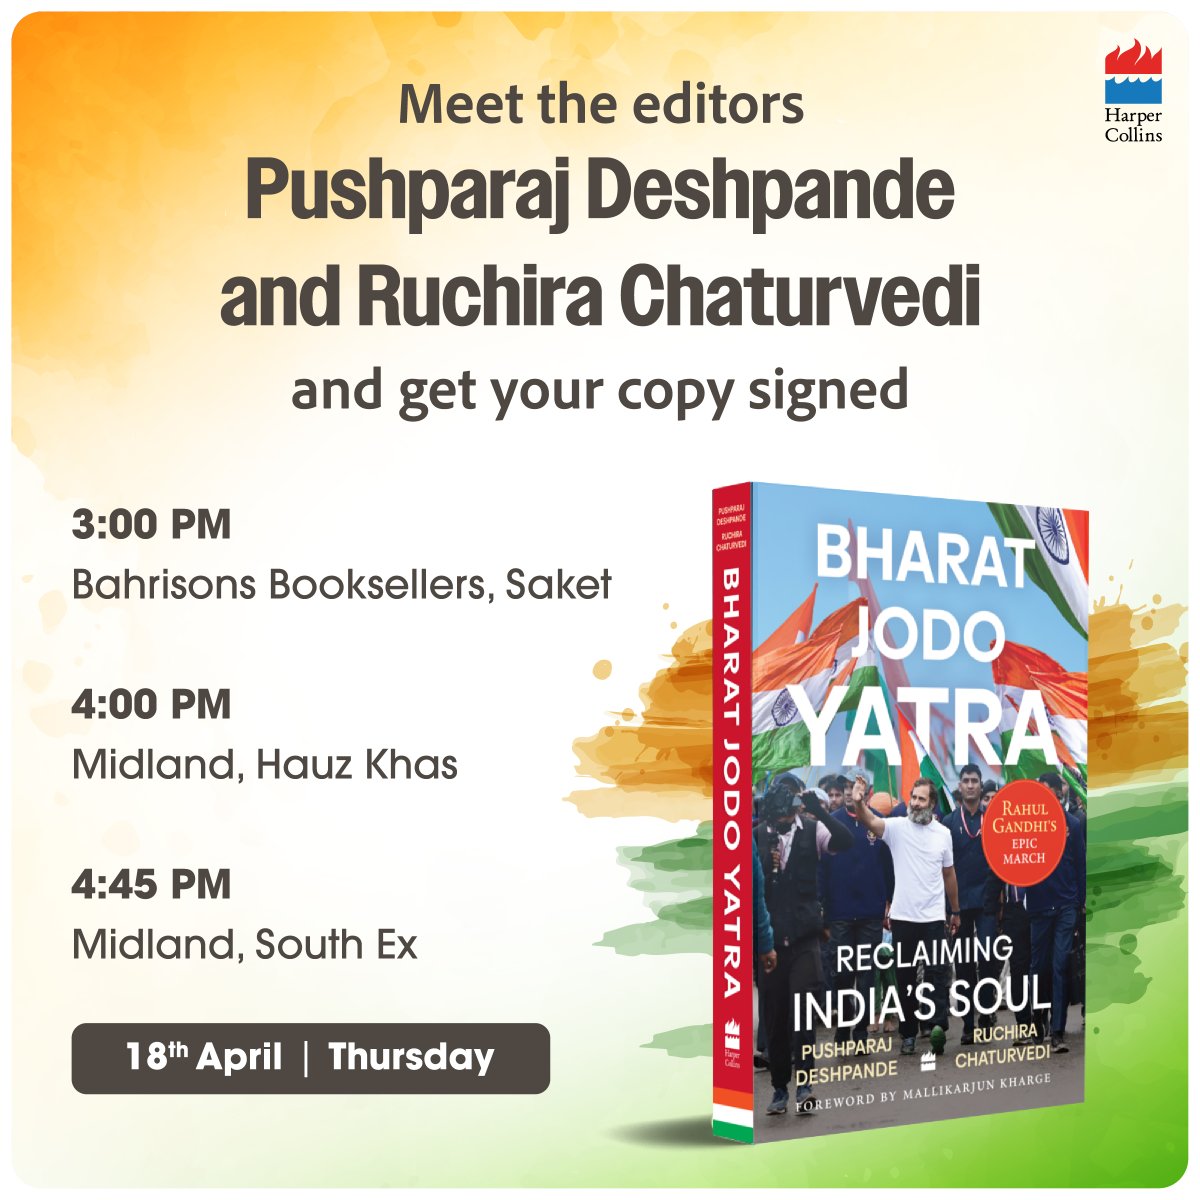 #Delhi readers, @PushparajVD and @RuchiraC will be signing copies of their edited anthology of essays on the #BharatJodoYatra on 18th April. Find them at your local bookstores and get your own signed copy! @Bahrisons_books @midlandbook @midlandsouthex